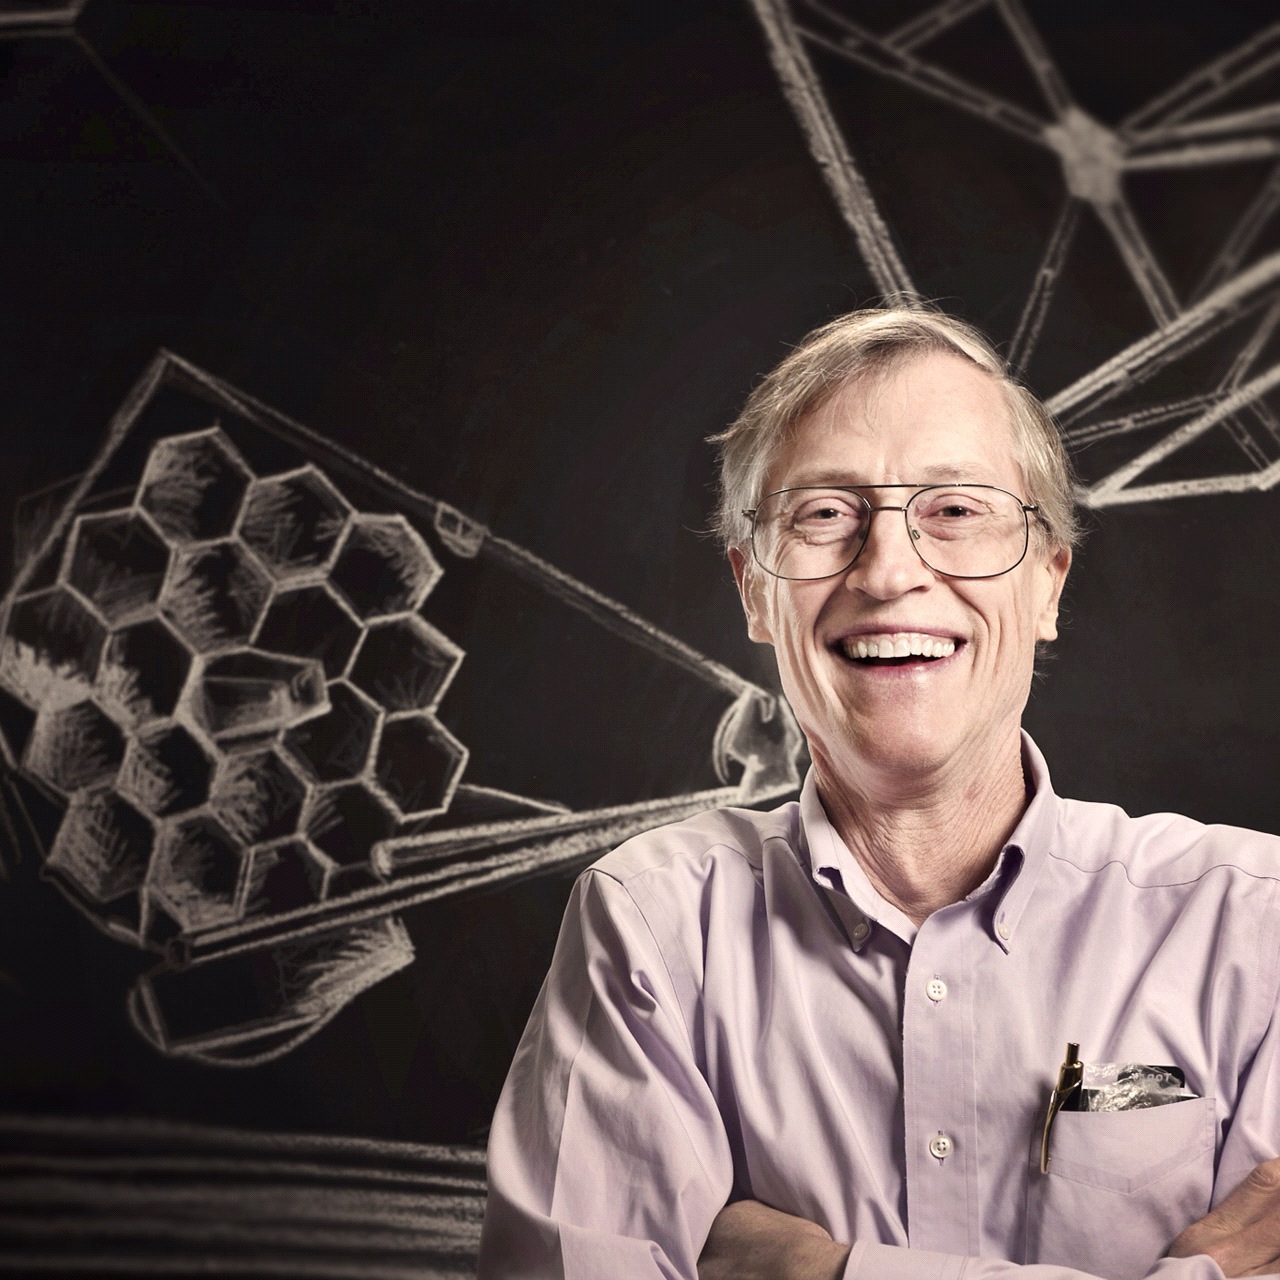 Dr. John Mather, the senior project scientist on the James Webb Space Telescope,